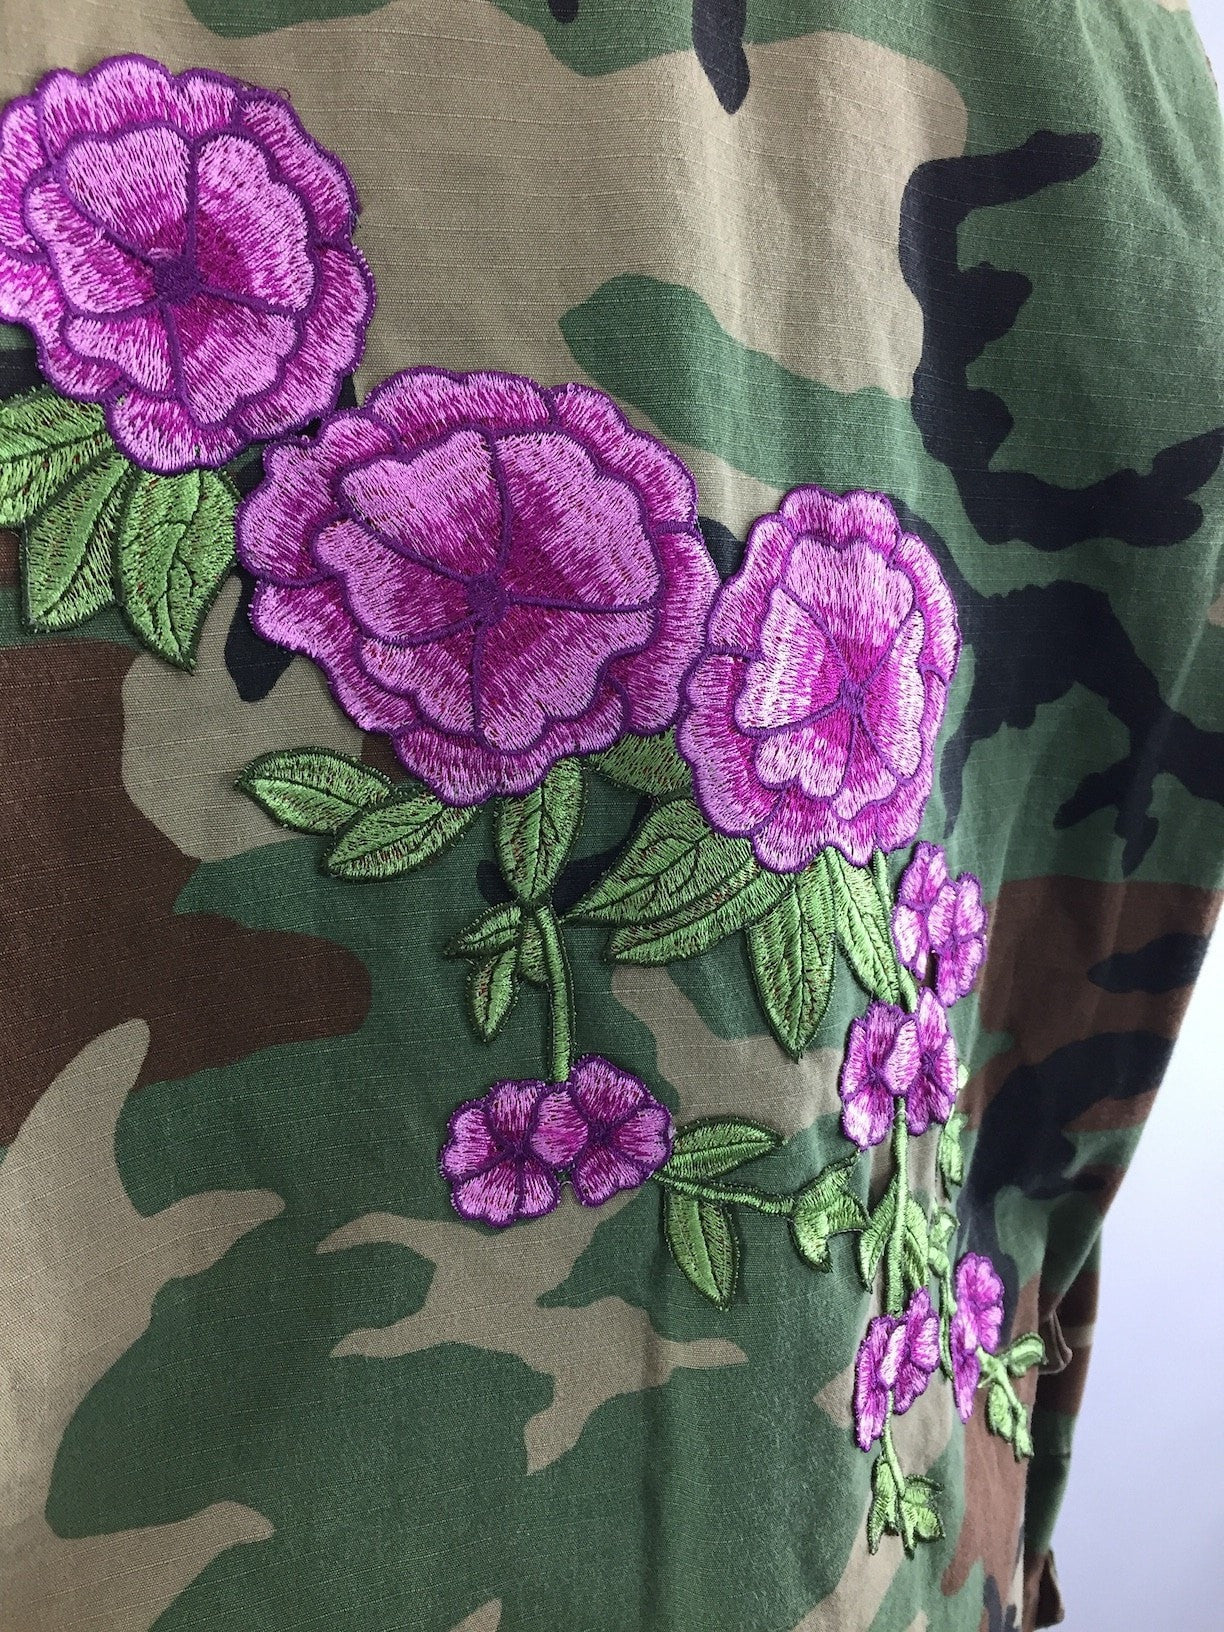 Vintage Air Force Embroidered Camouflage Jacket / Magenta Pink Floral Embroidery Camo - ThisBlueBird